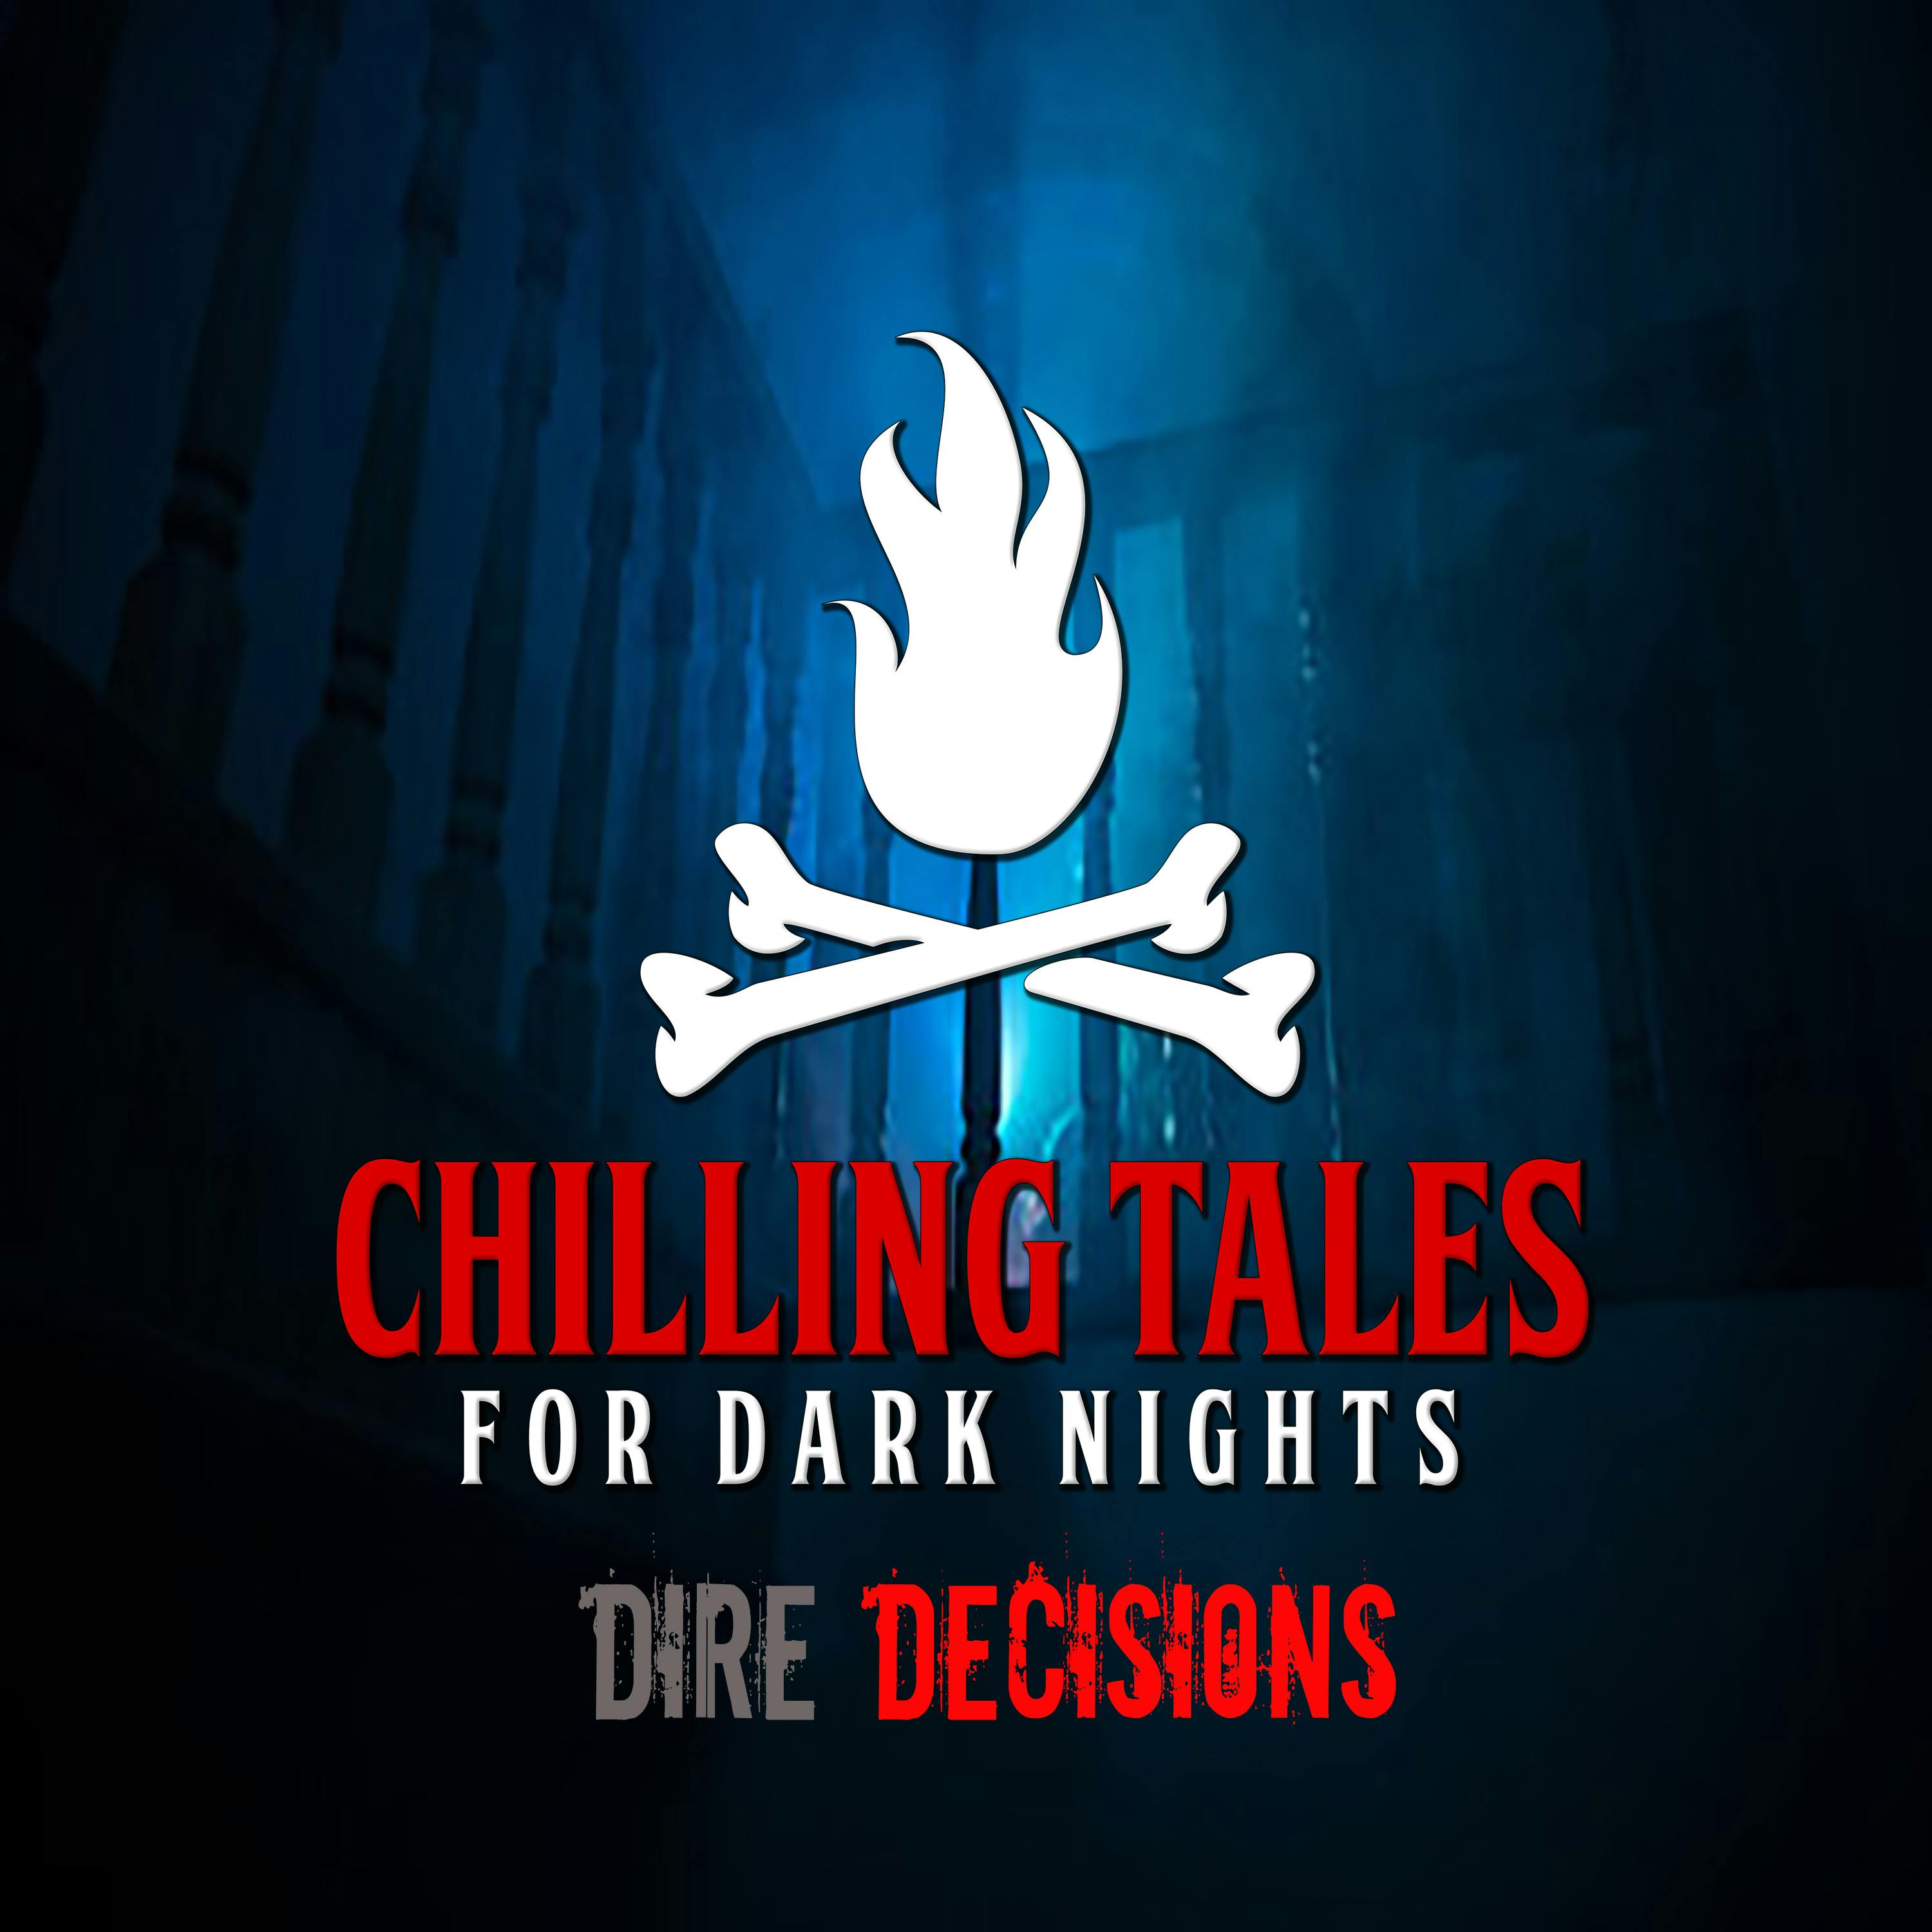 124: Dire Decisions - Chilling Tales for Dark Nights